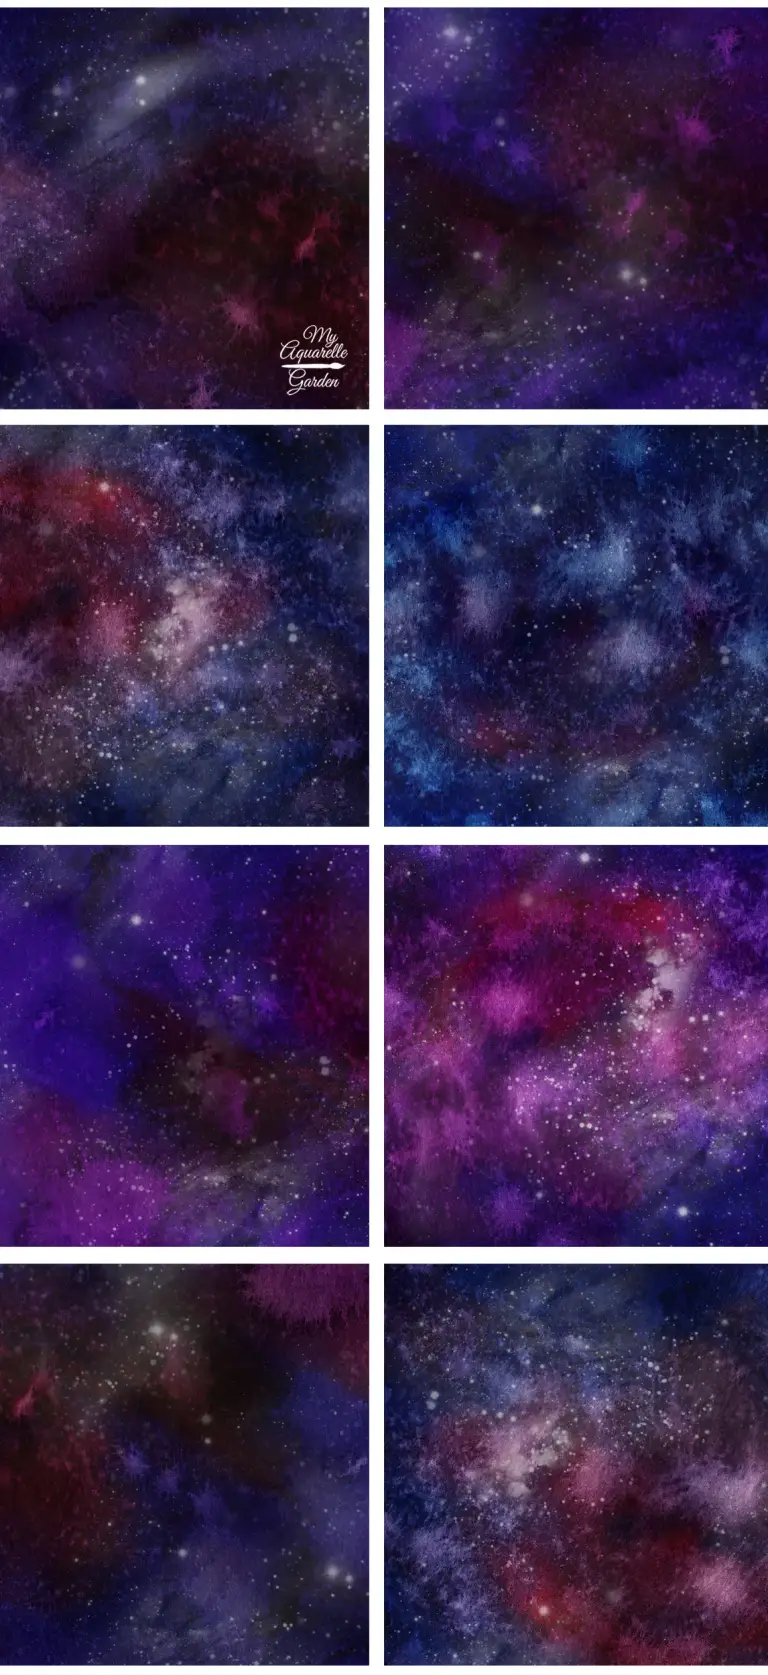 Outer space background texture. Watercolor hand-painted clipart.